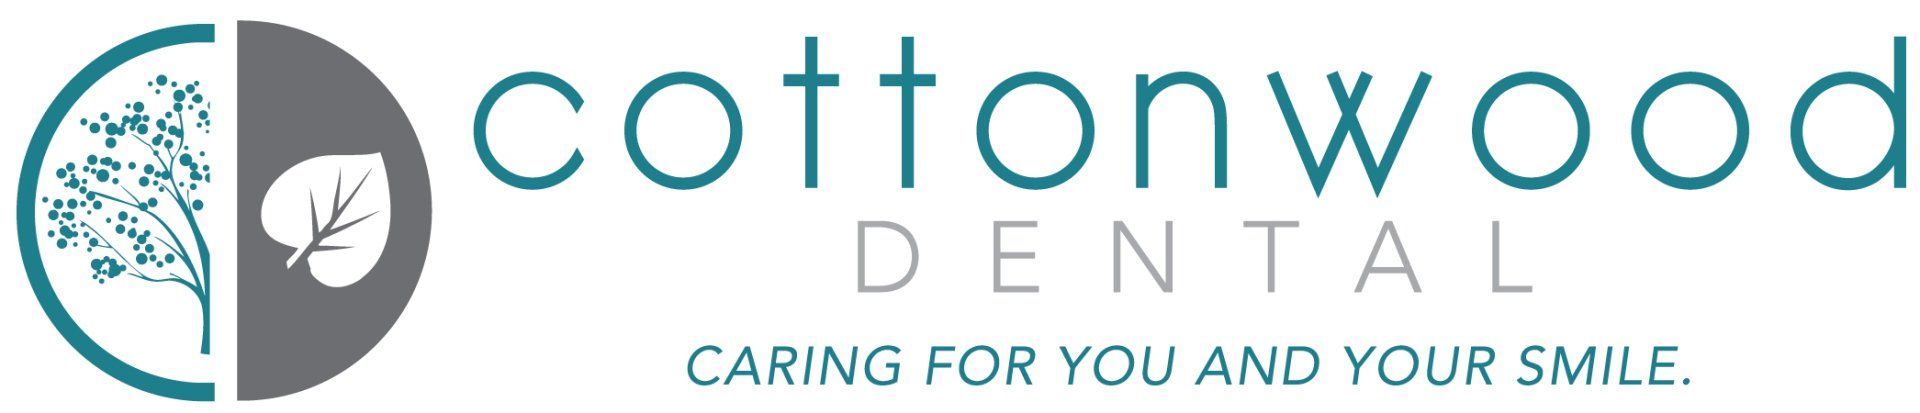 Cottonwood Dental | Grand Island, NE - Caring for you and your smile.